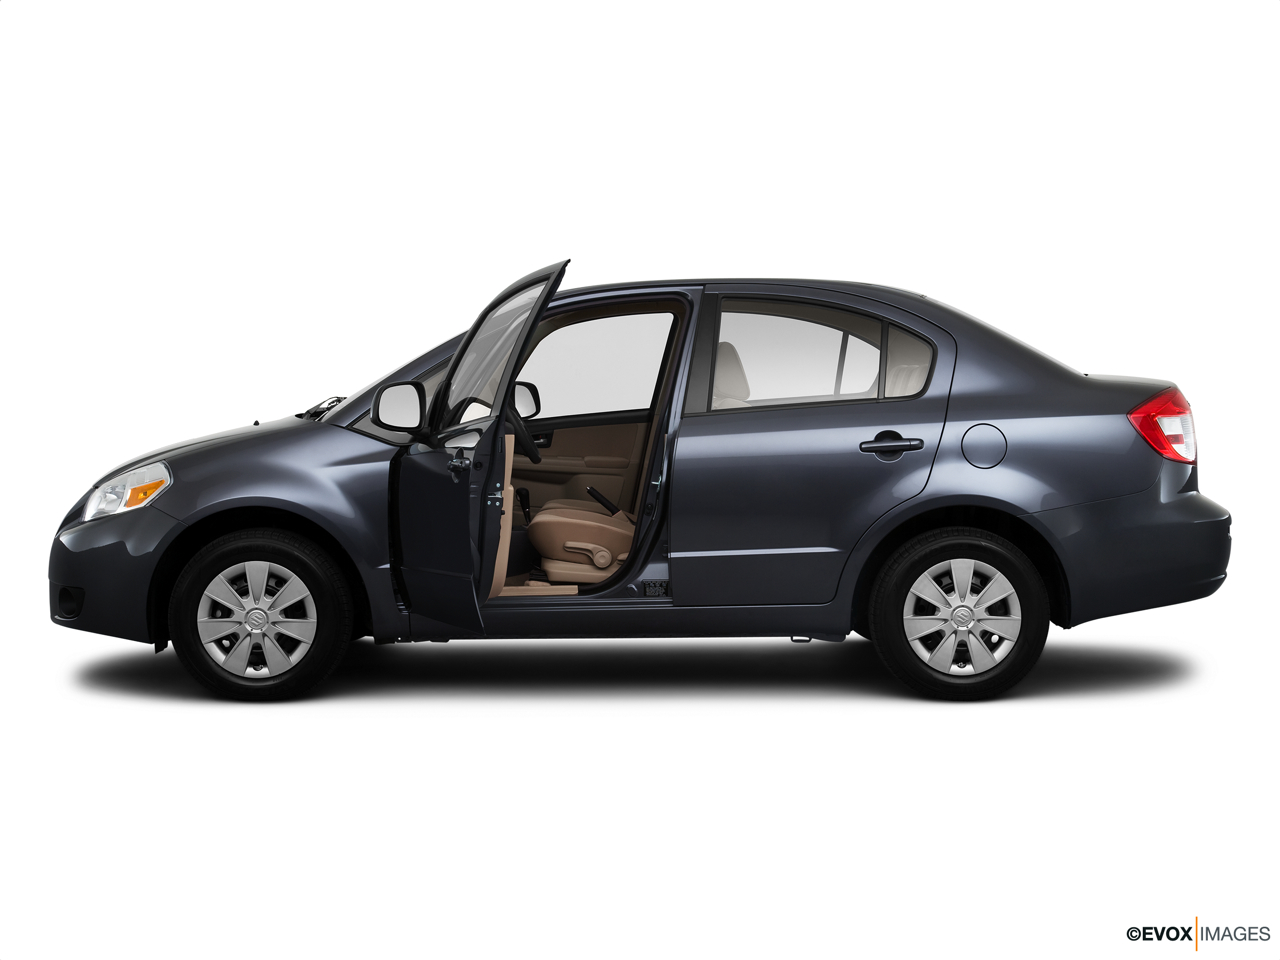 2010 Suzuki SX4 LE Popular Driver's side profile with drivers side door open. 